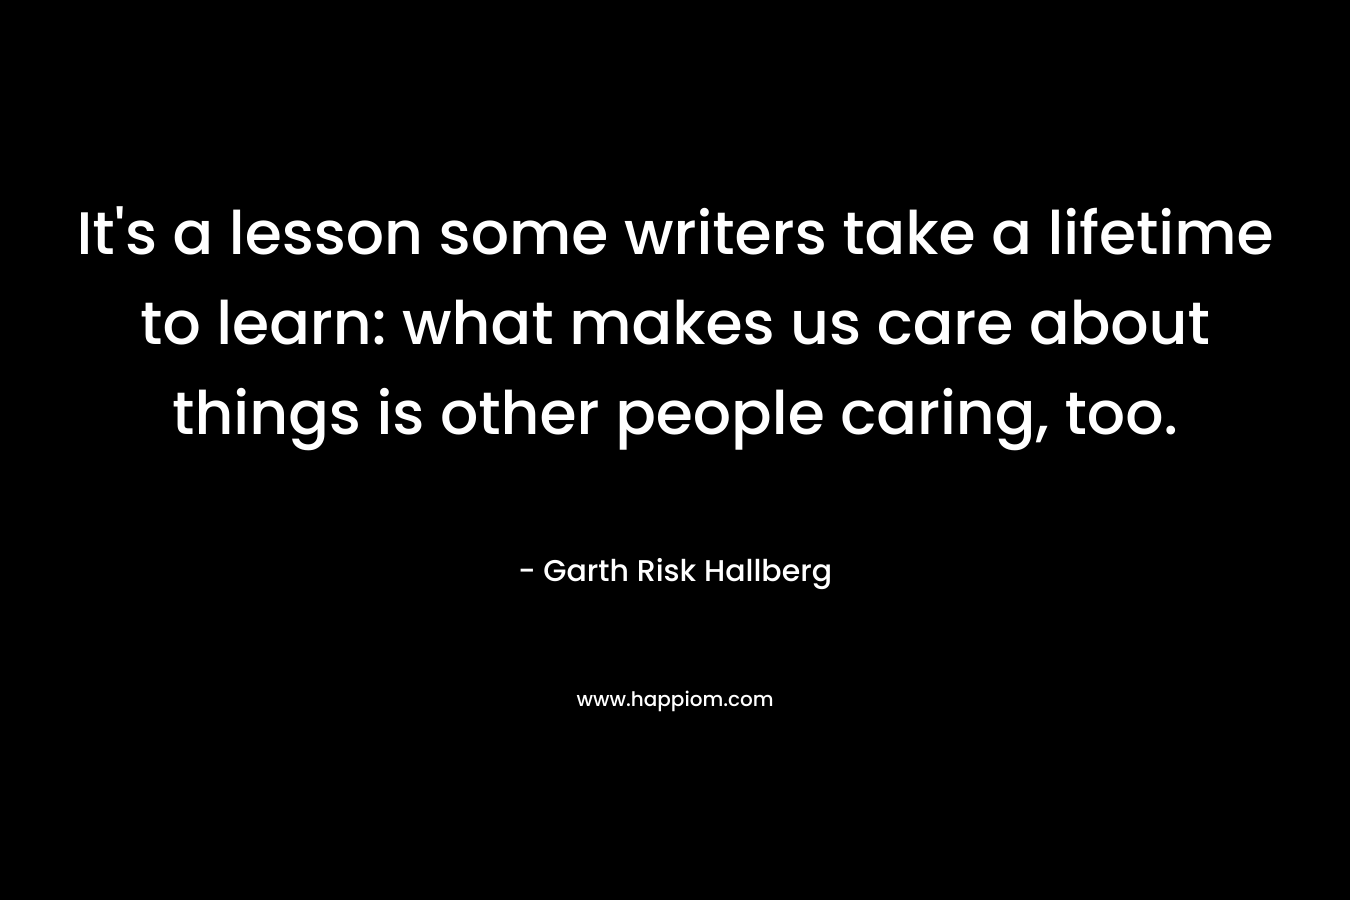 It's a lesson some writers take a lifetime to learn: what makes us care about things is other people caring, too.